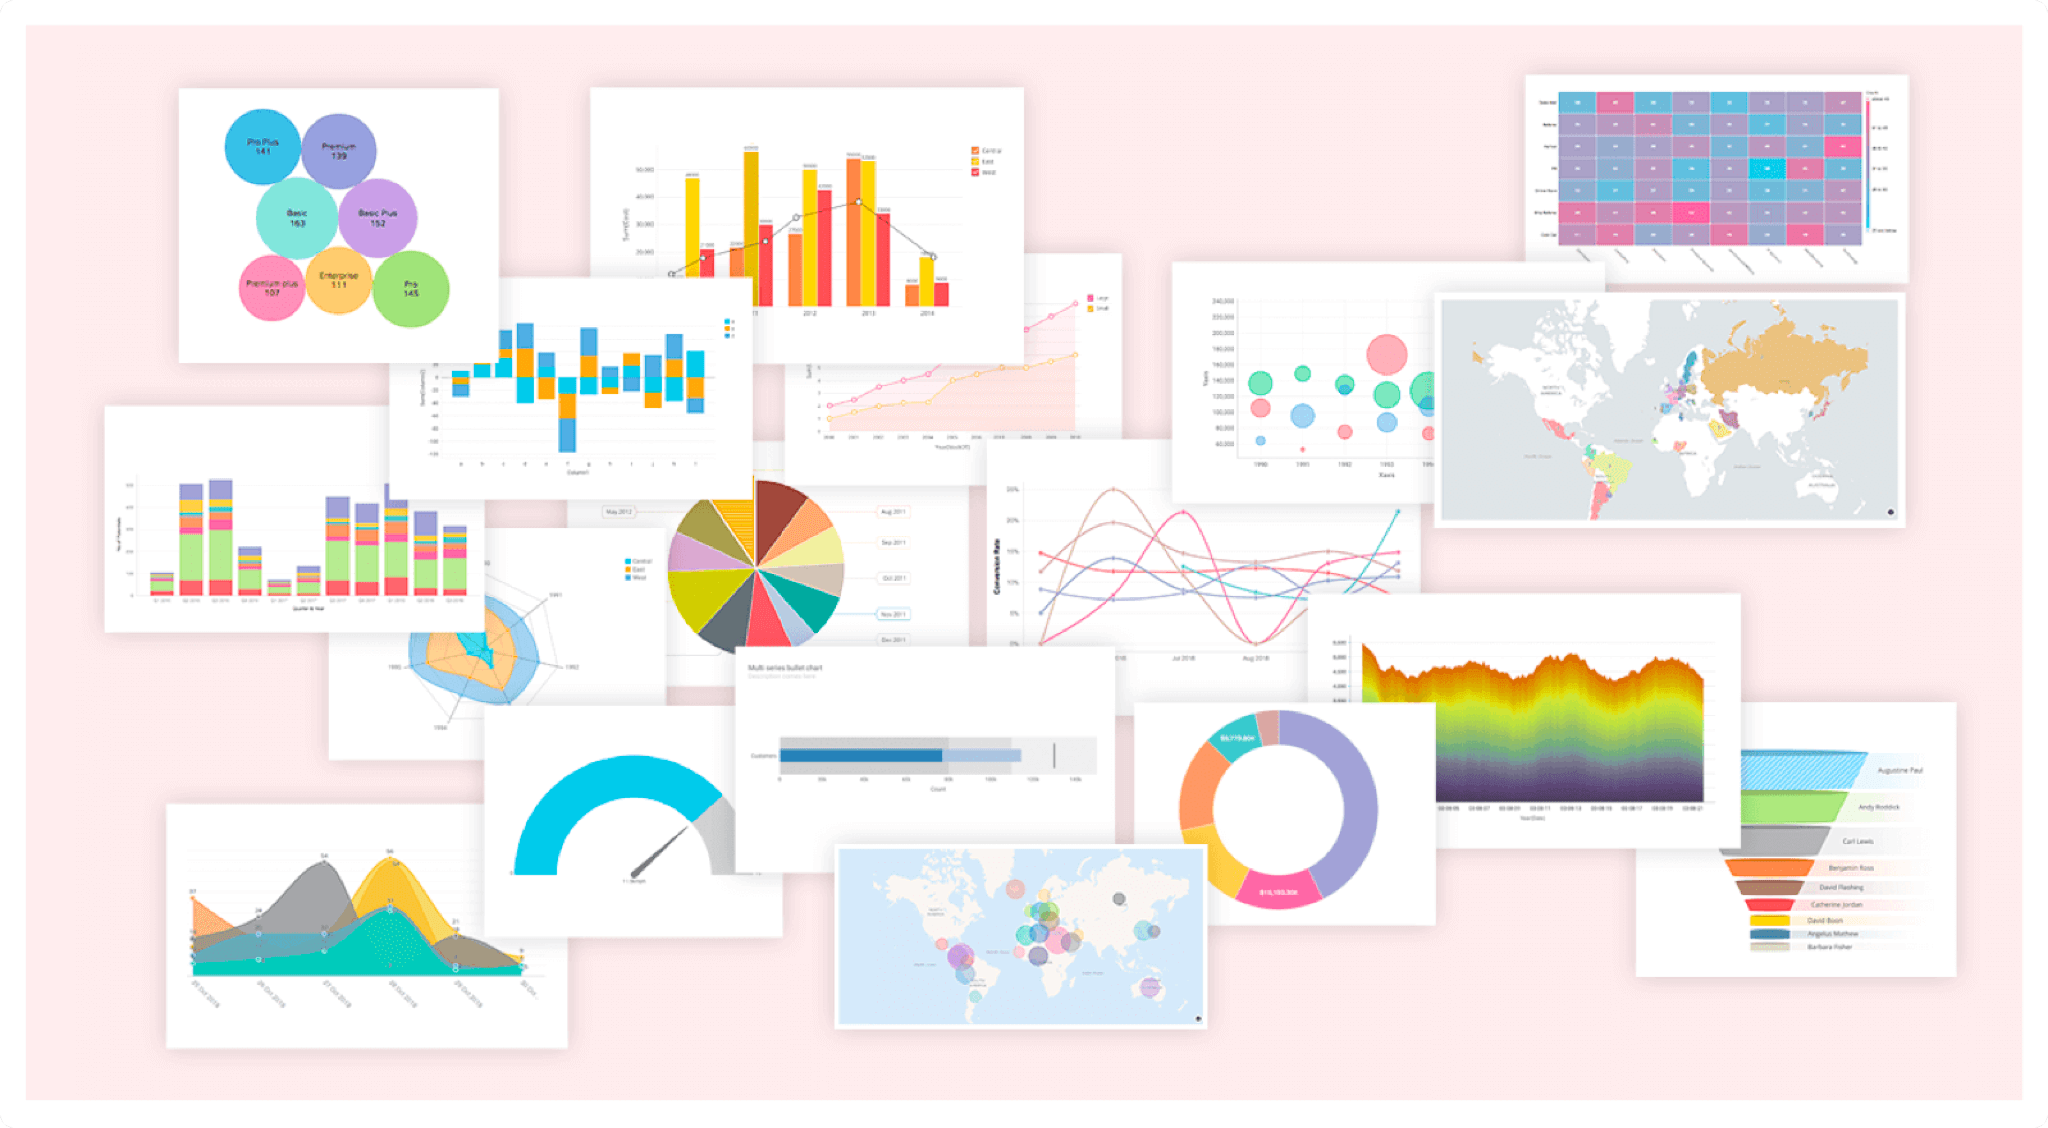 Transform data with 50+ visualization types